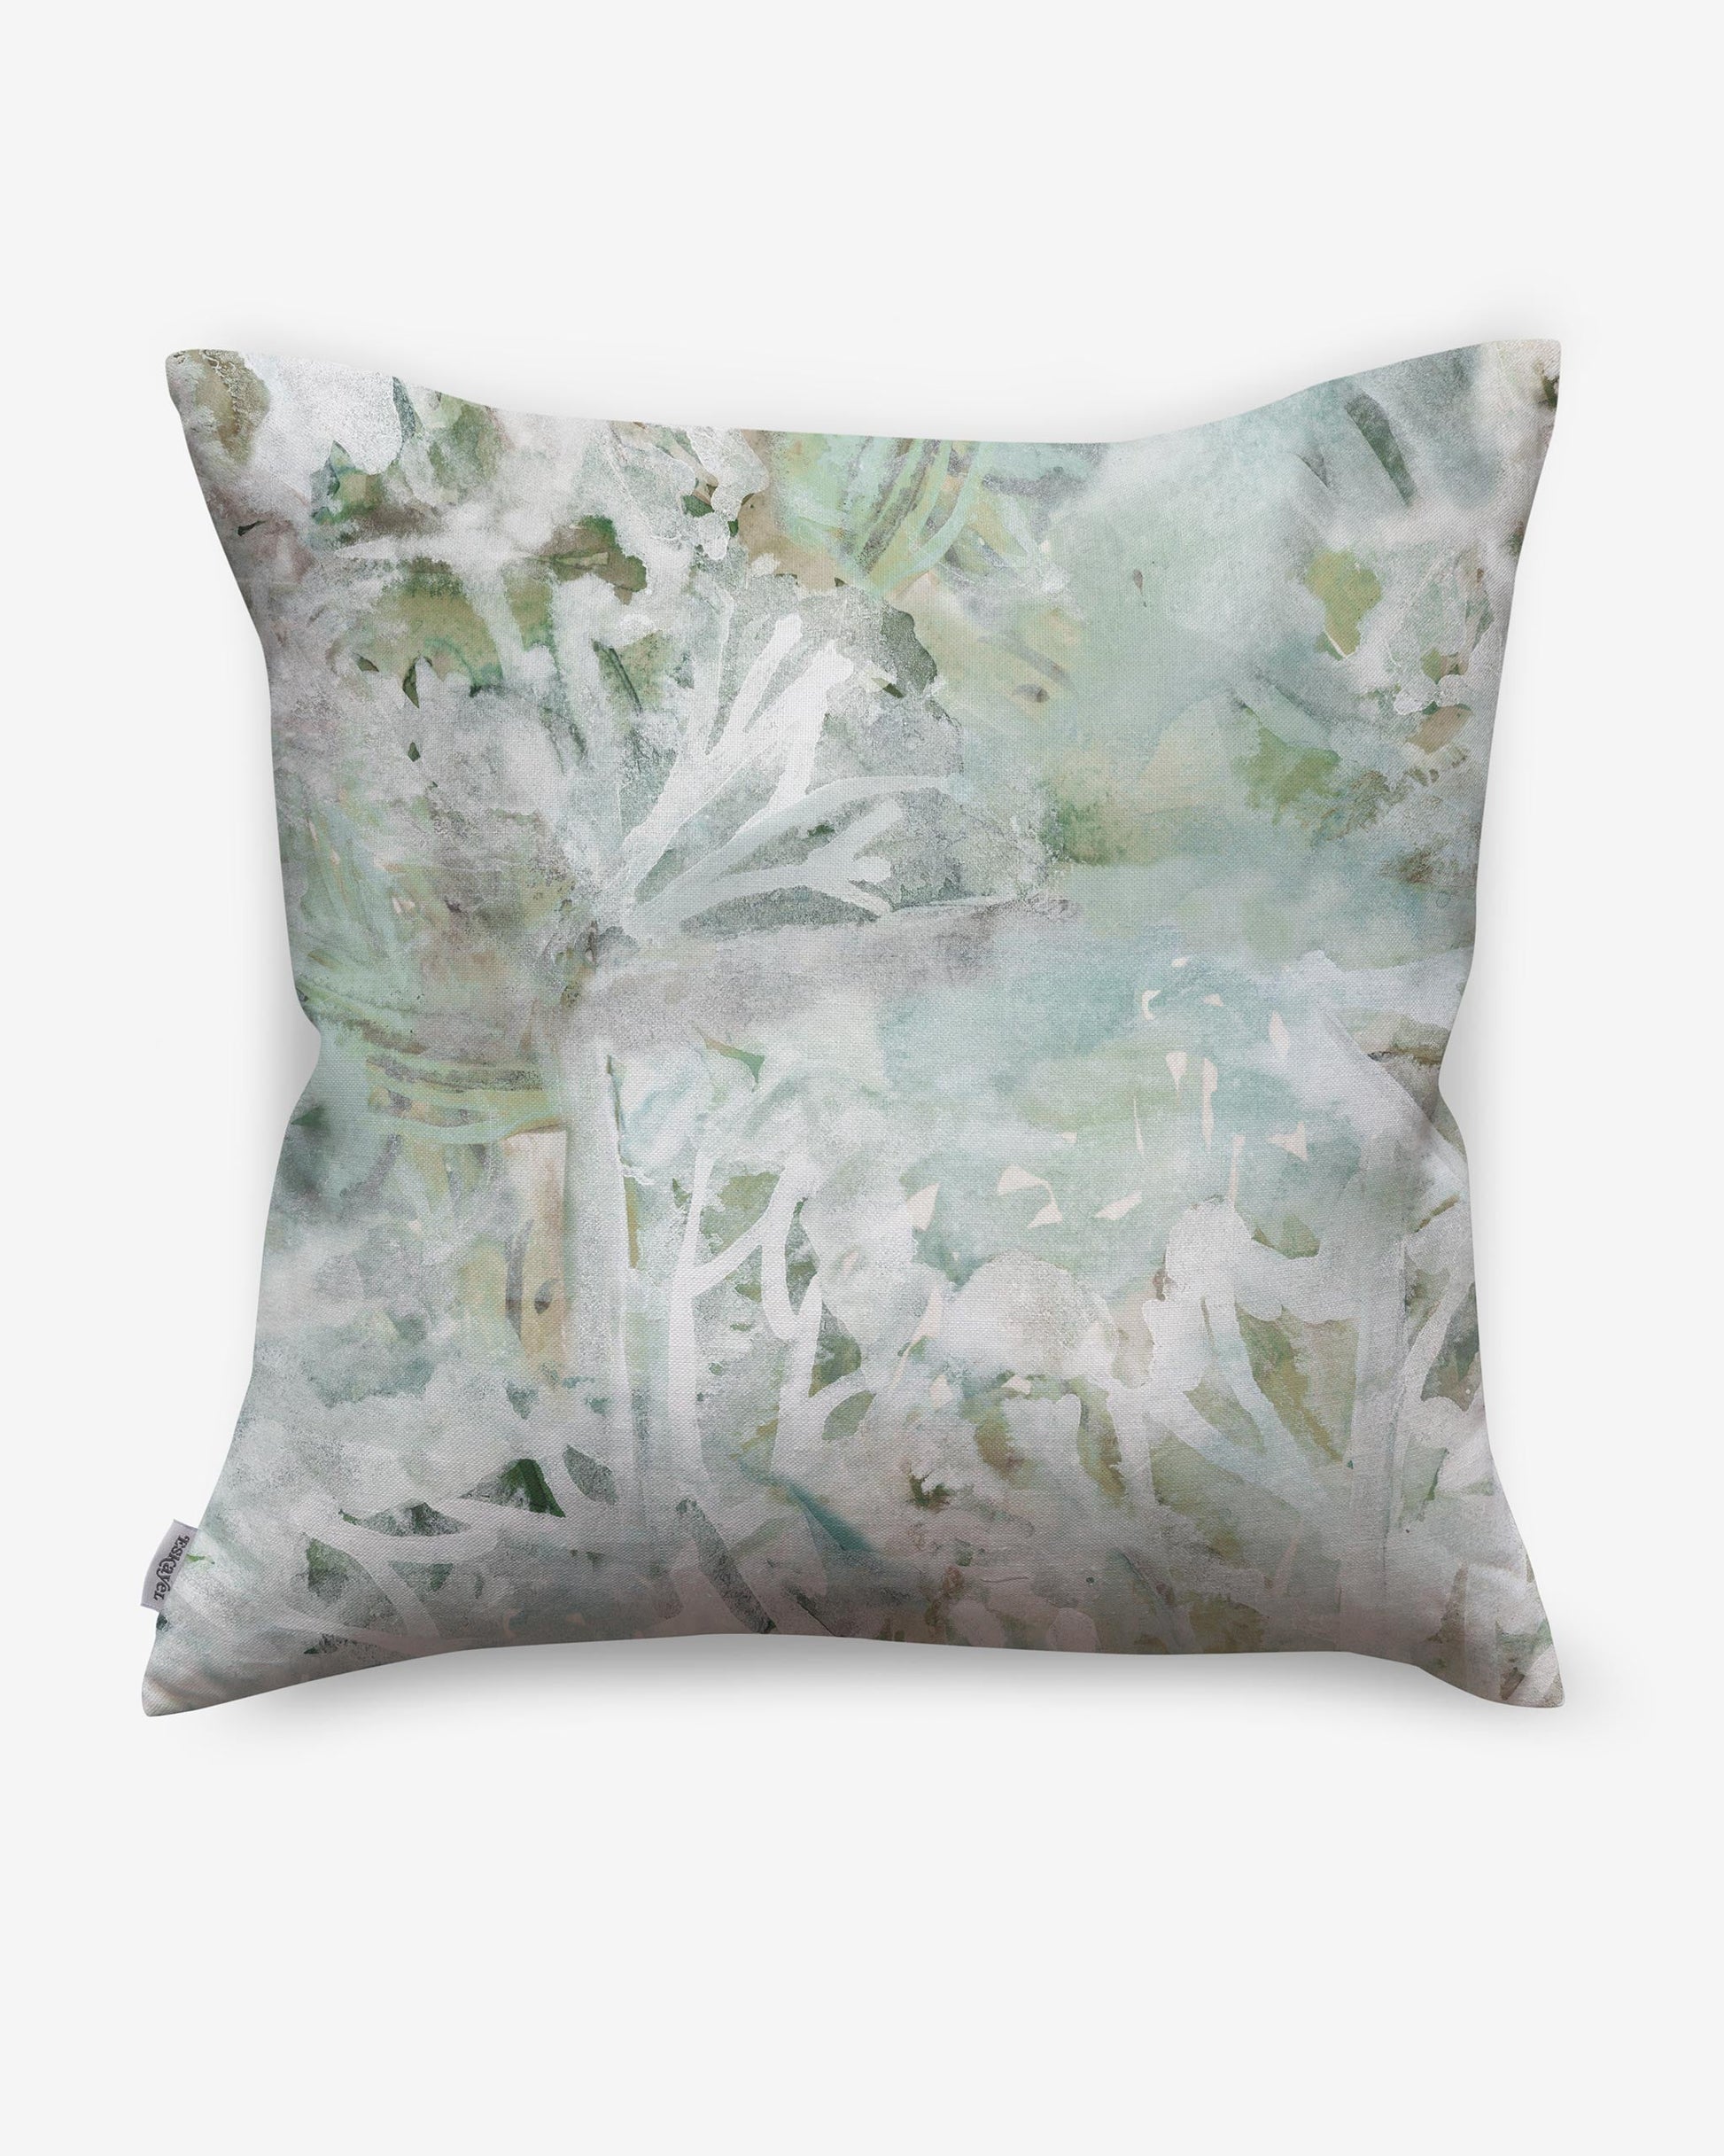 A Cortile Pillow||Verde with a watercolor painting on it.